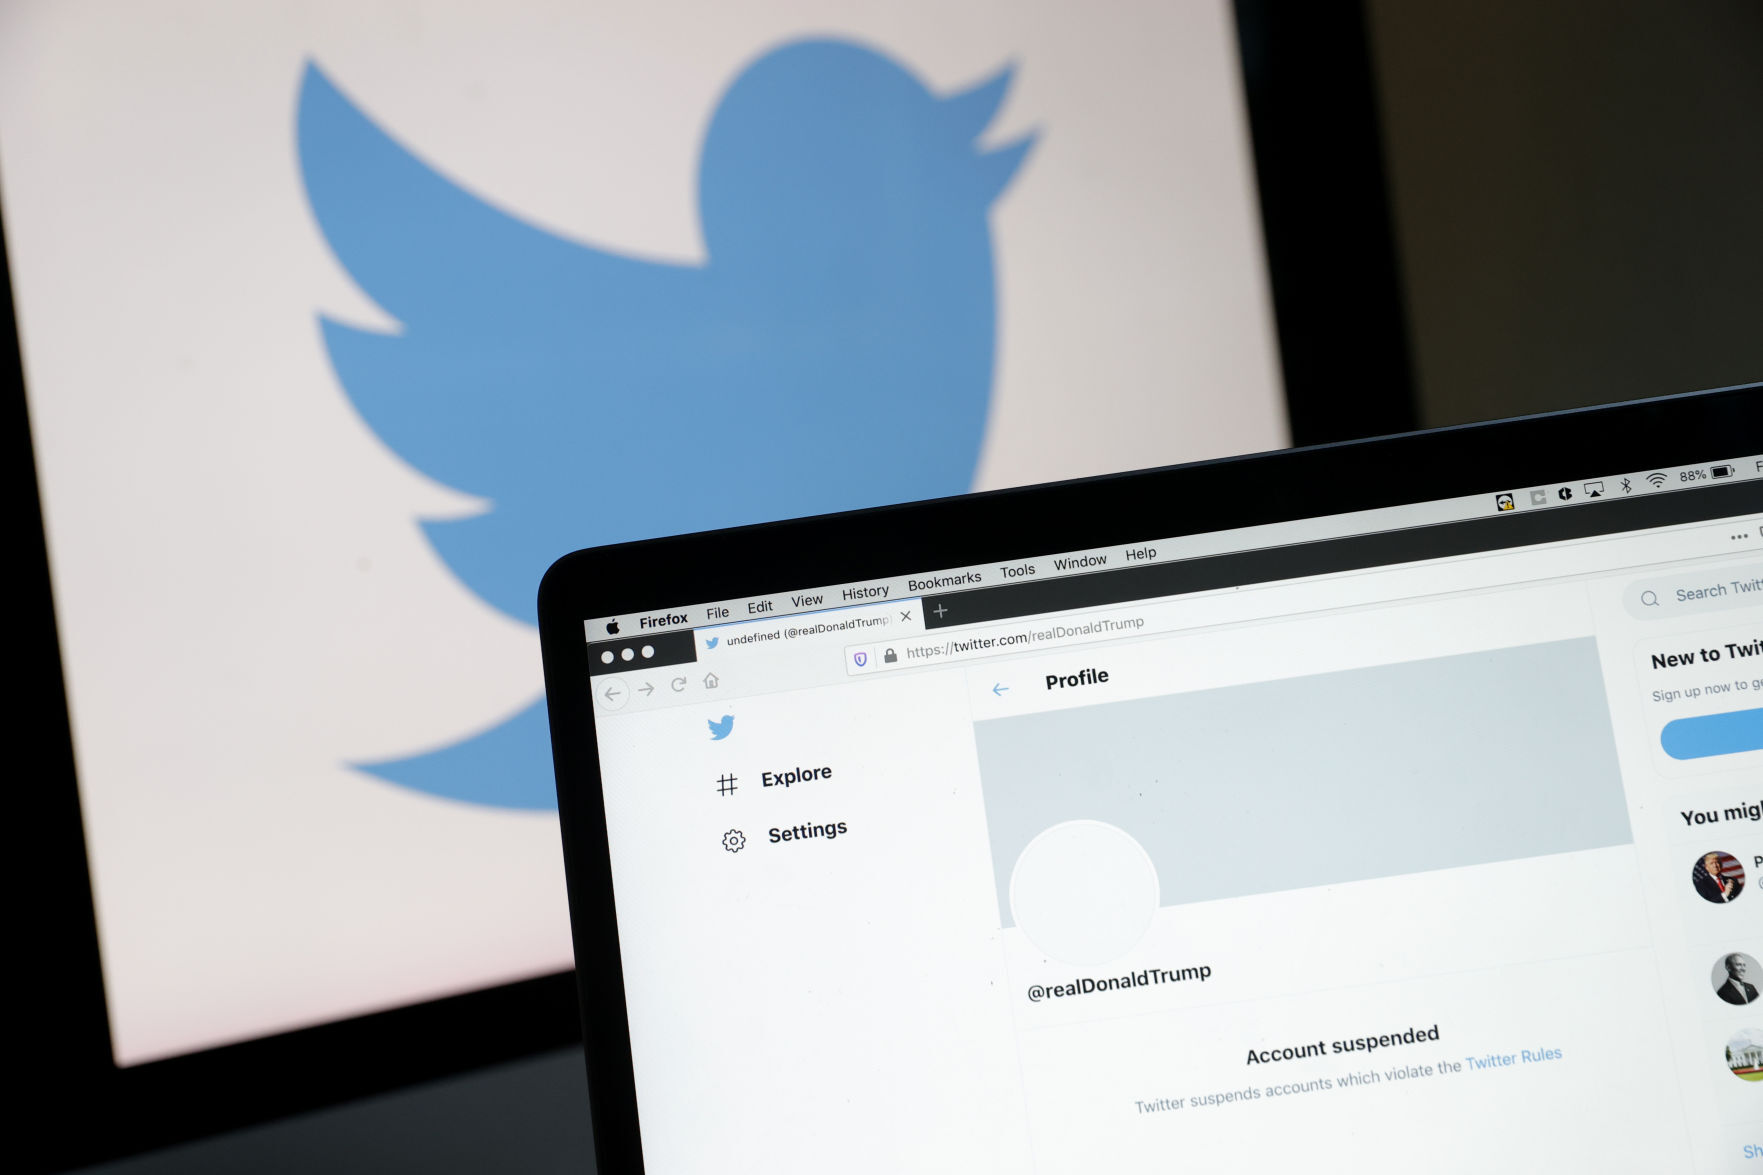 Code-named Project Guardian, an internal Twitter program includes a list of thousands of accounts most likely to be attacked or harassed on the platform, including politicians, journalists, musicians and professional athletes.     PHOTO CREDIT: Tribune News Service